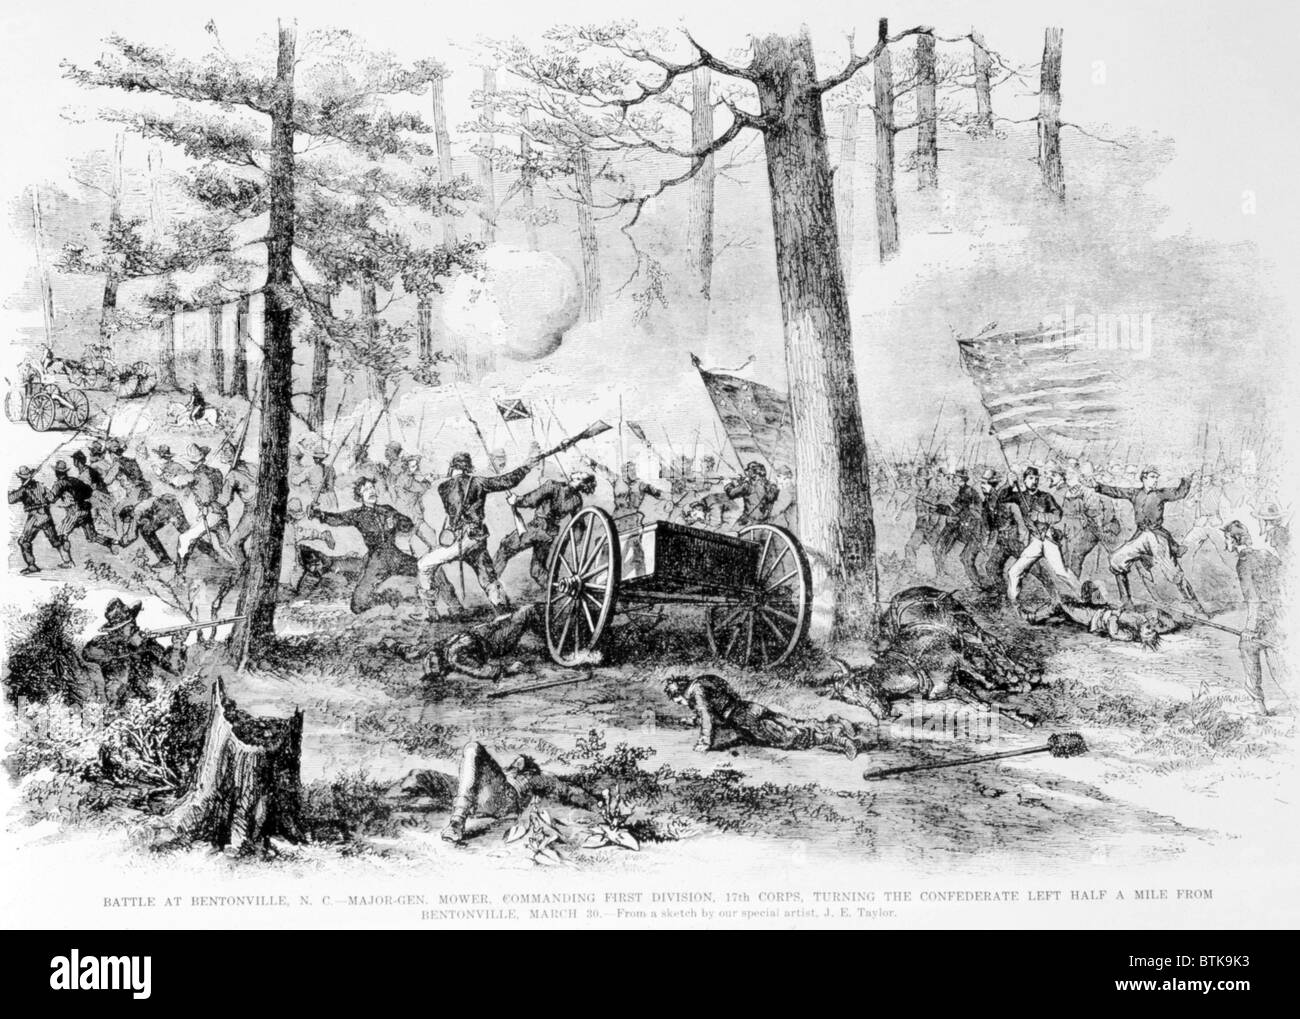 Battle at Bentonville, North Carolina, General Mower turning theConfederate flank, March 20, 1865 Stock Photo